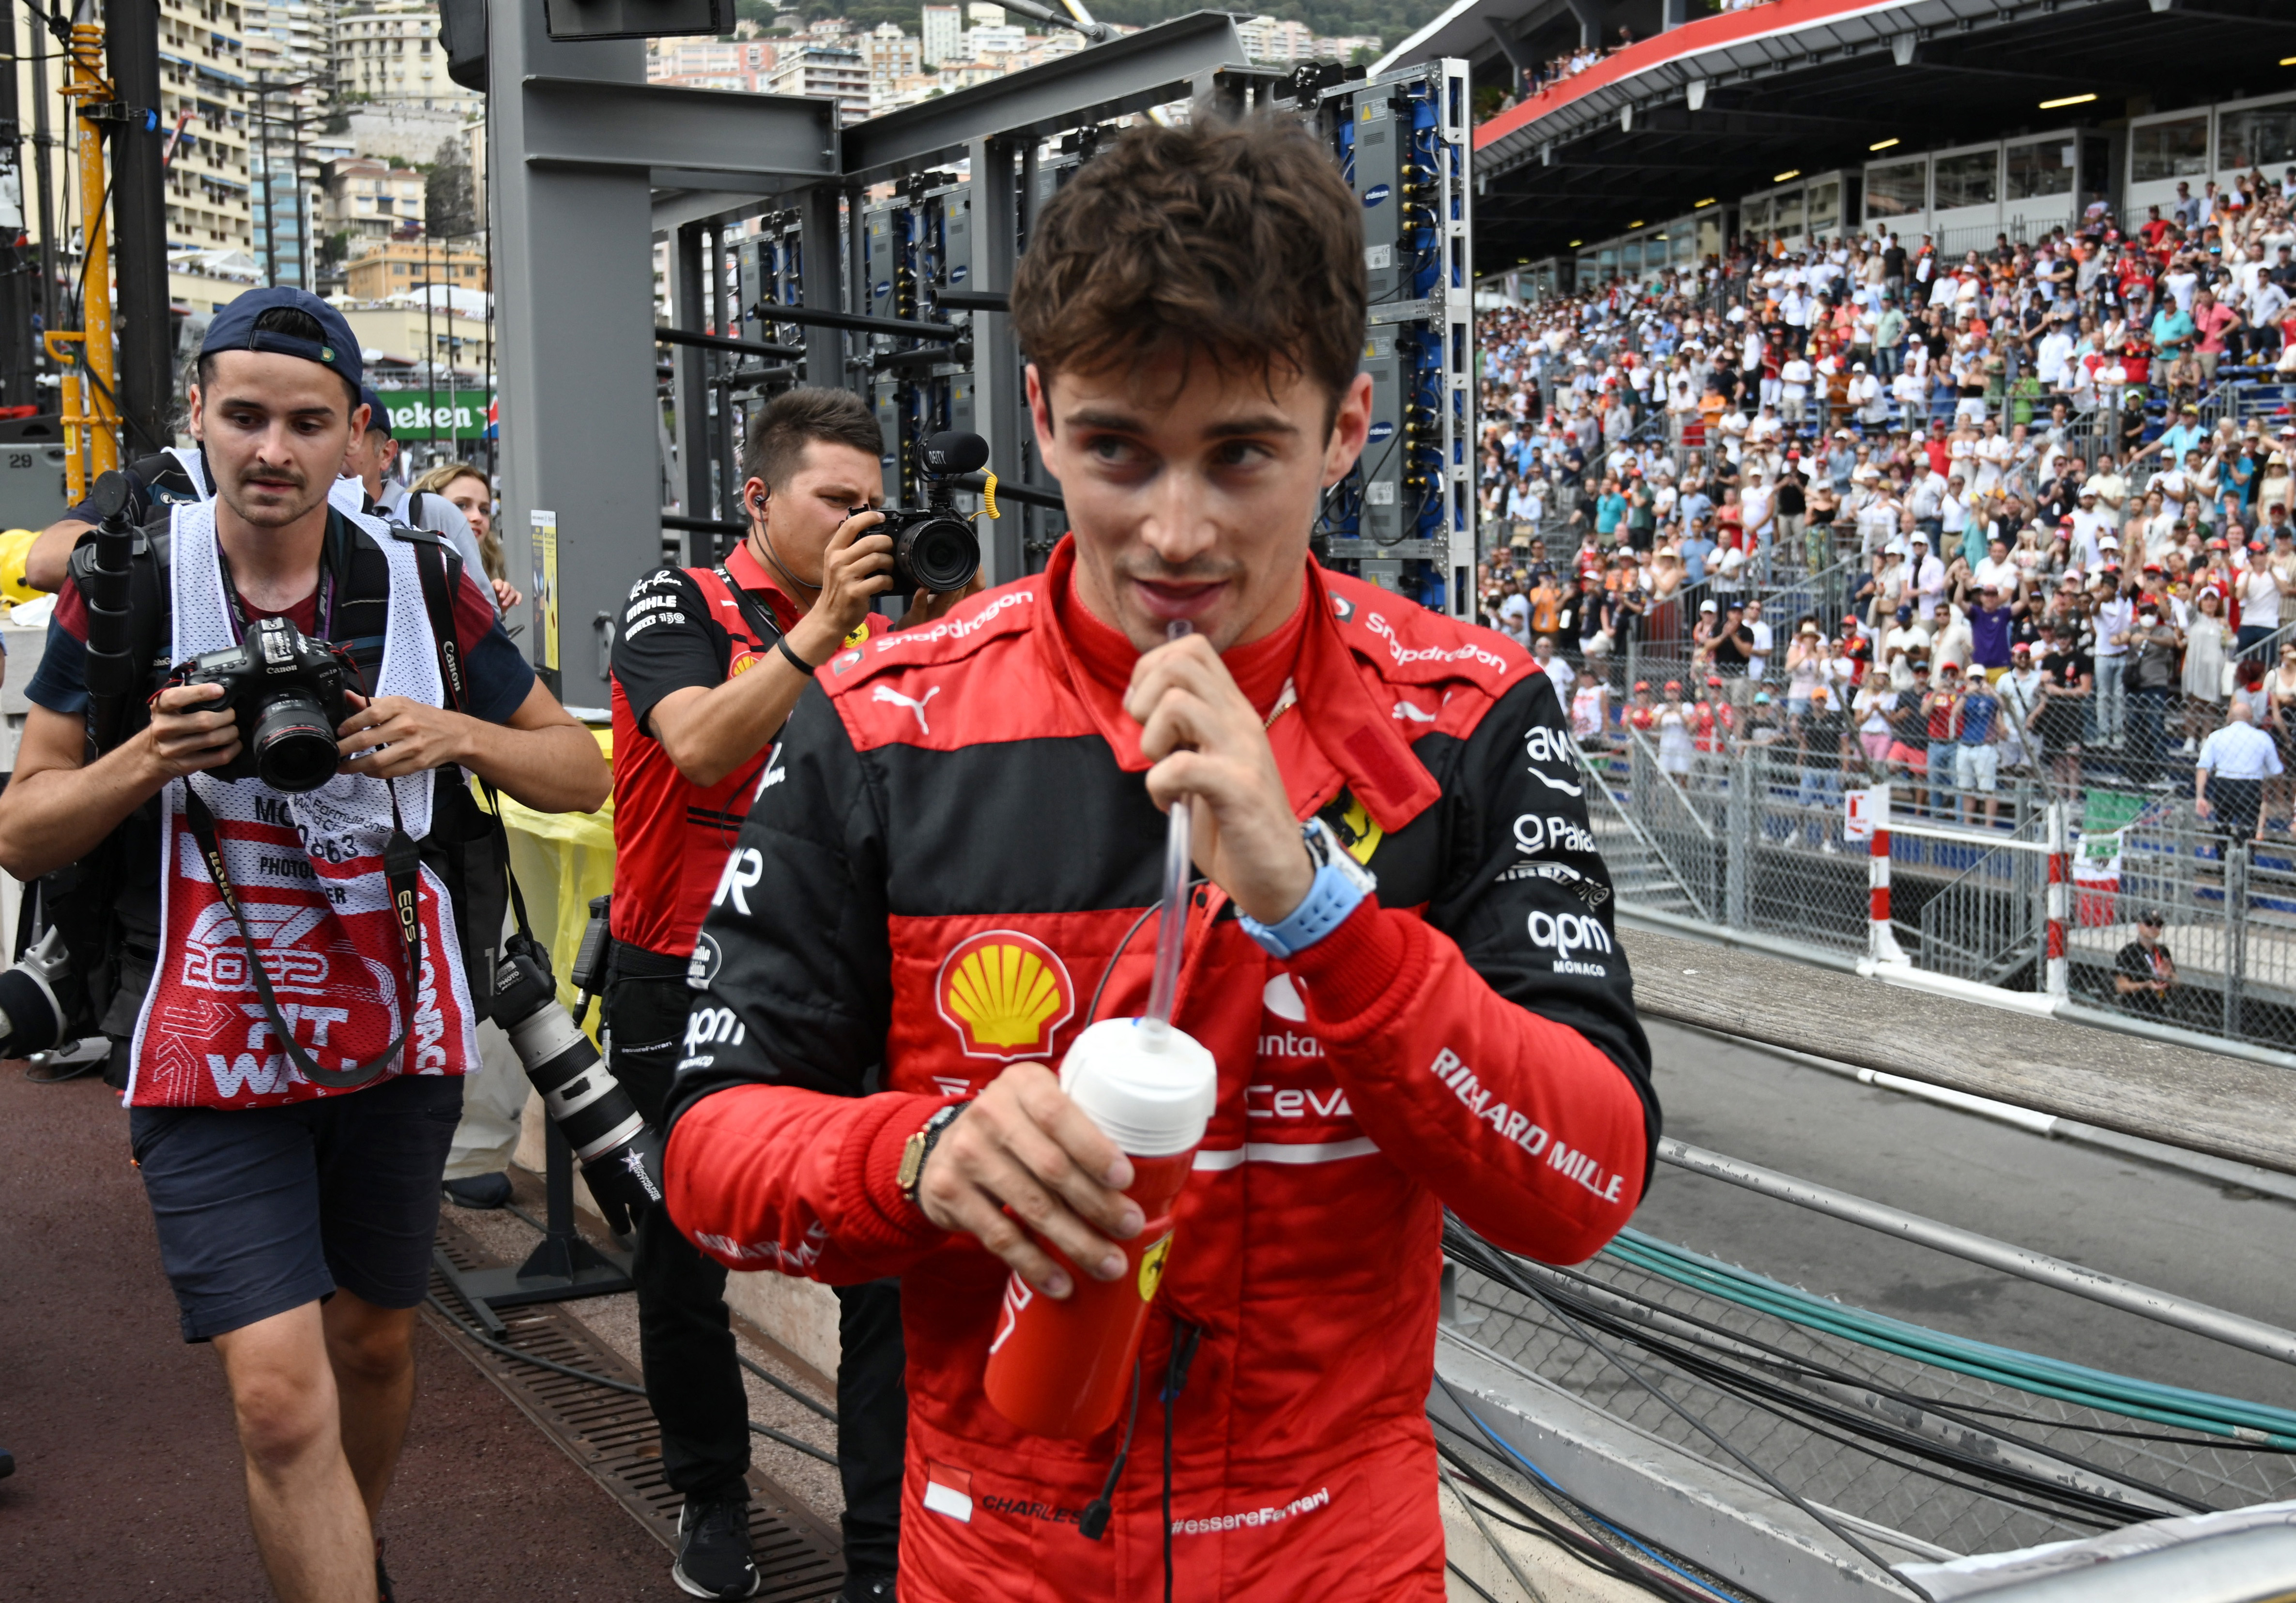 The curious case of Ferrari star Charles Leclerc and his future